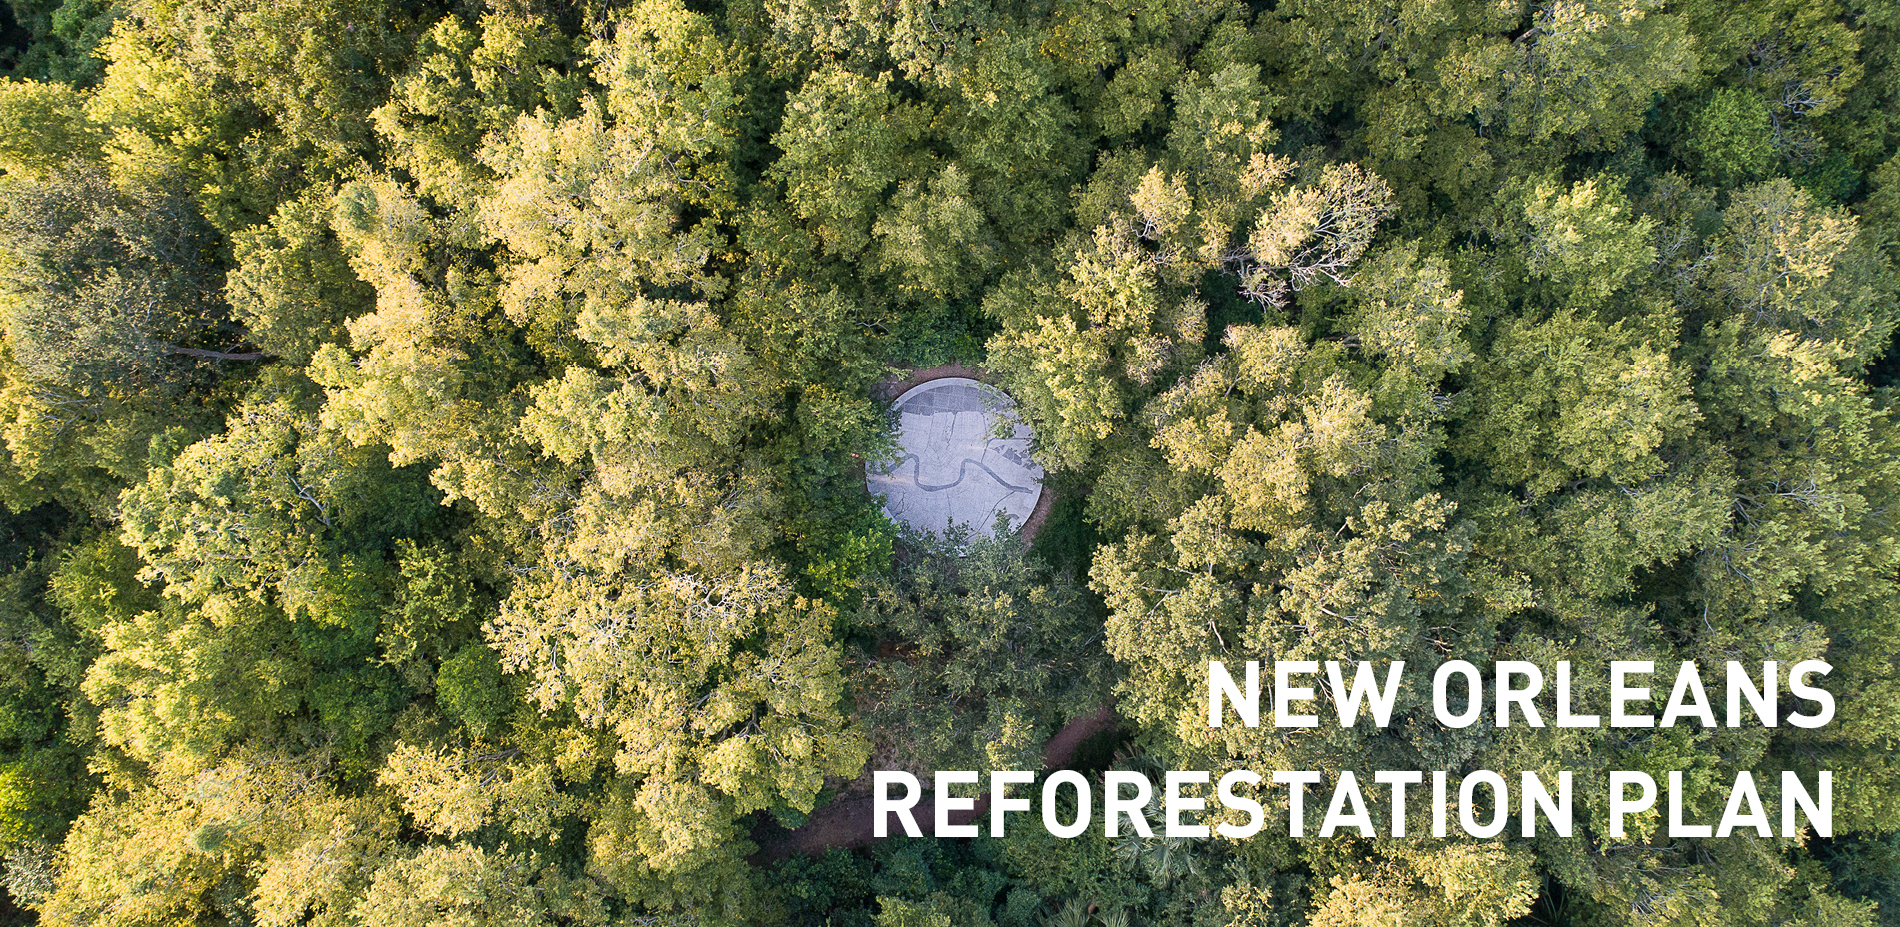 The New Orleans Reforestation Plan: Equity in the Urban Forest